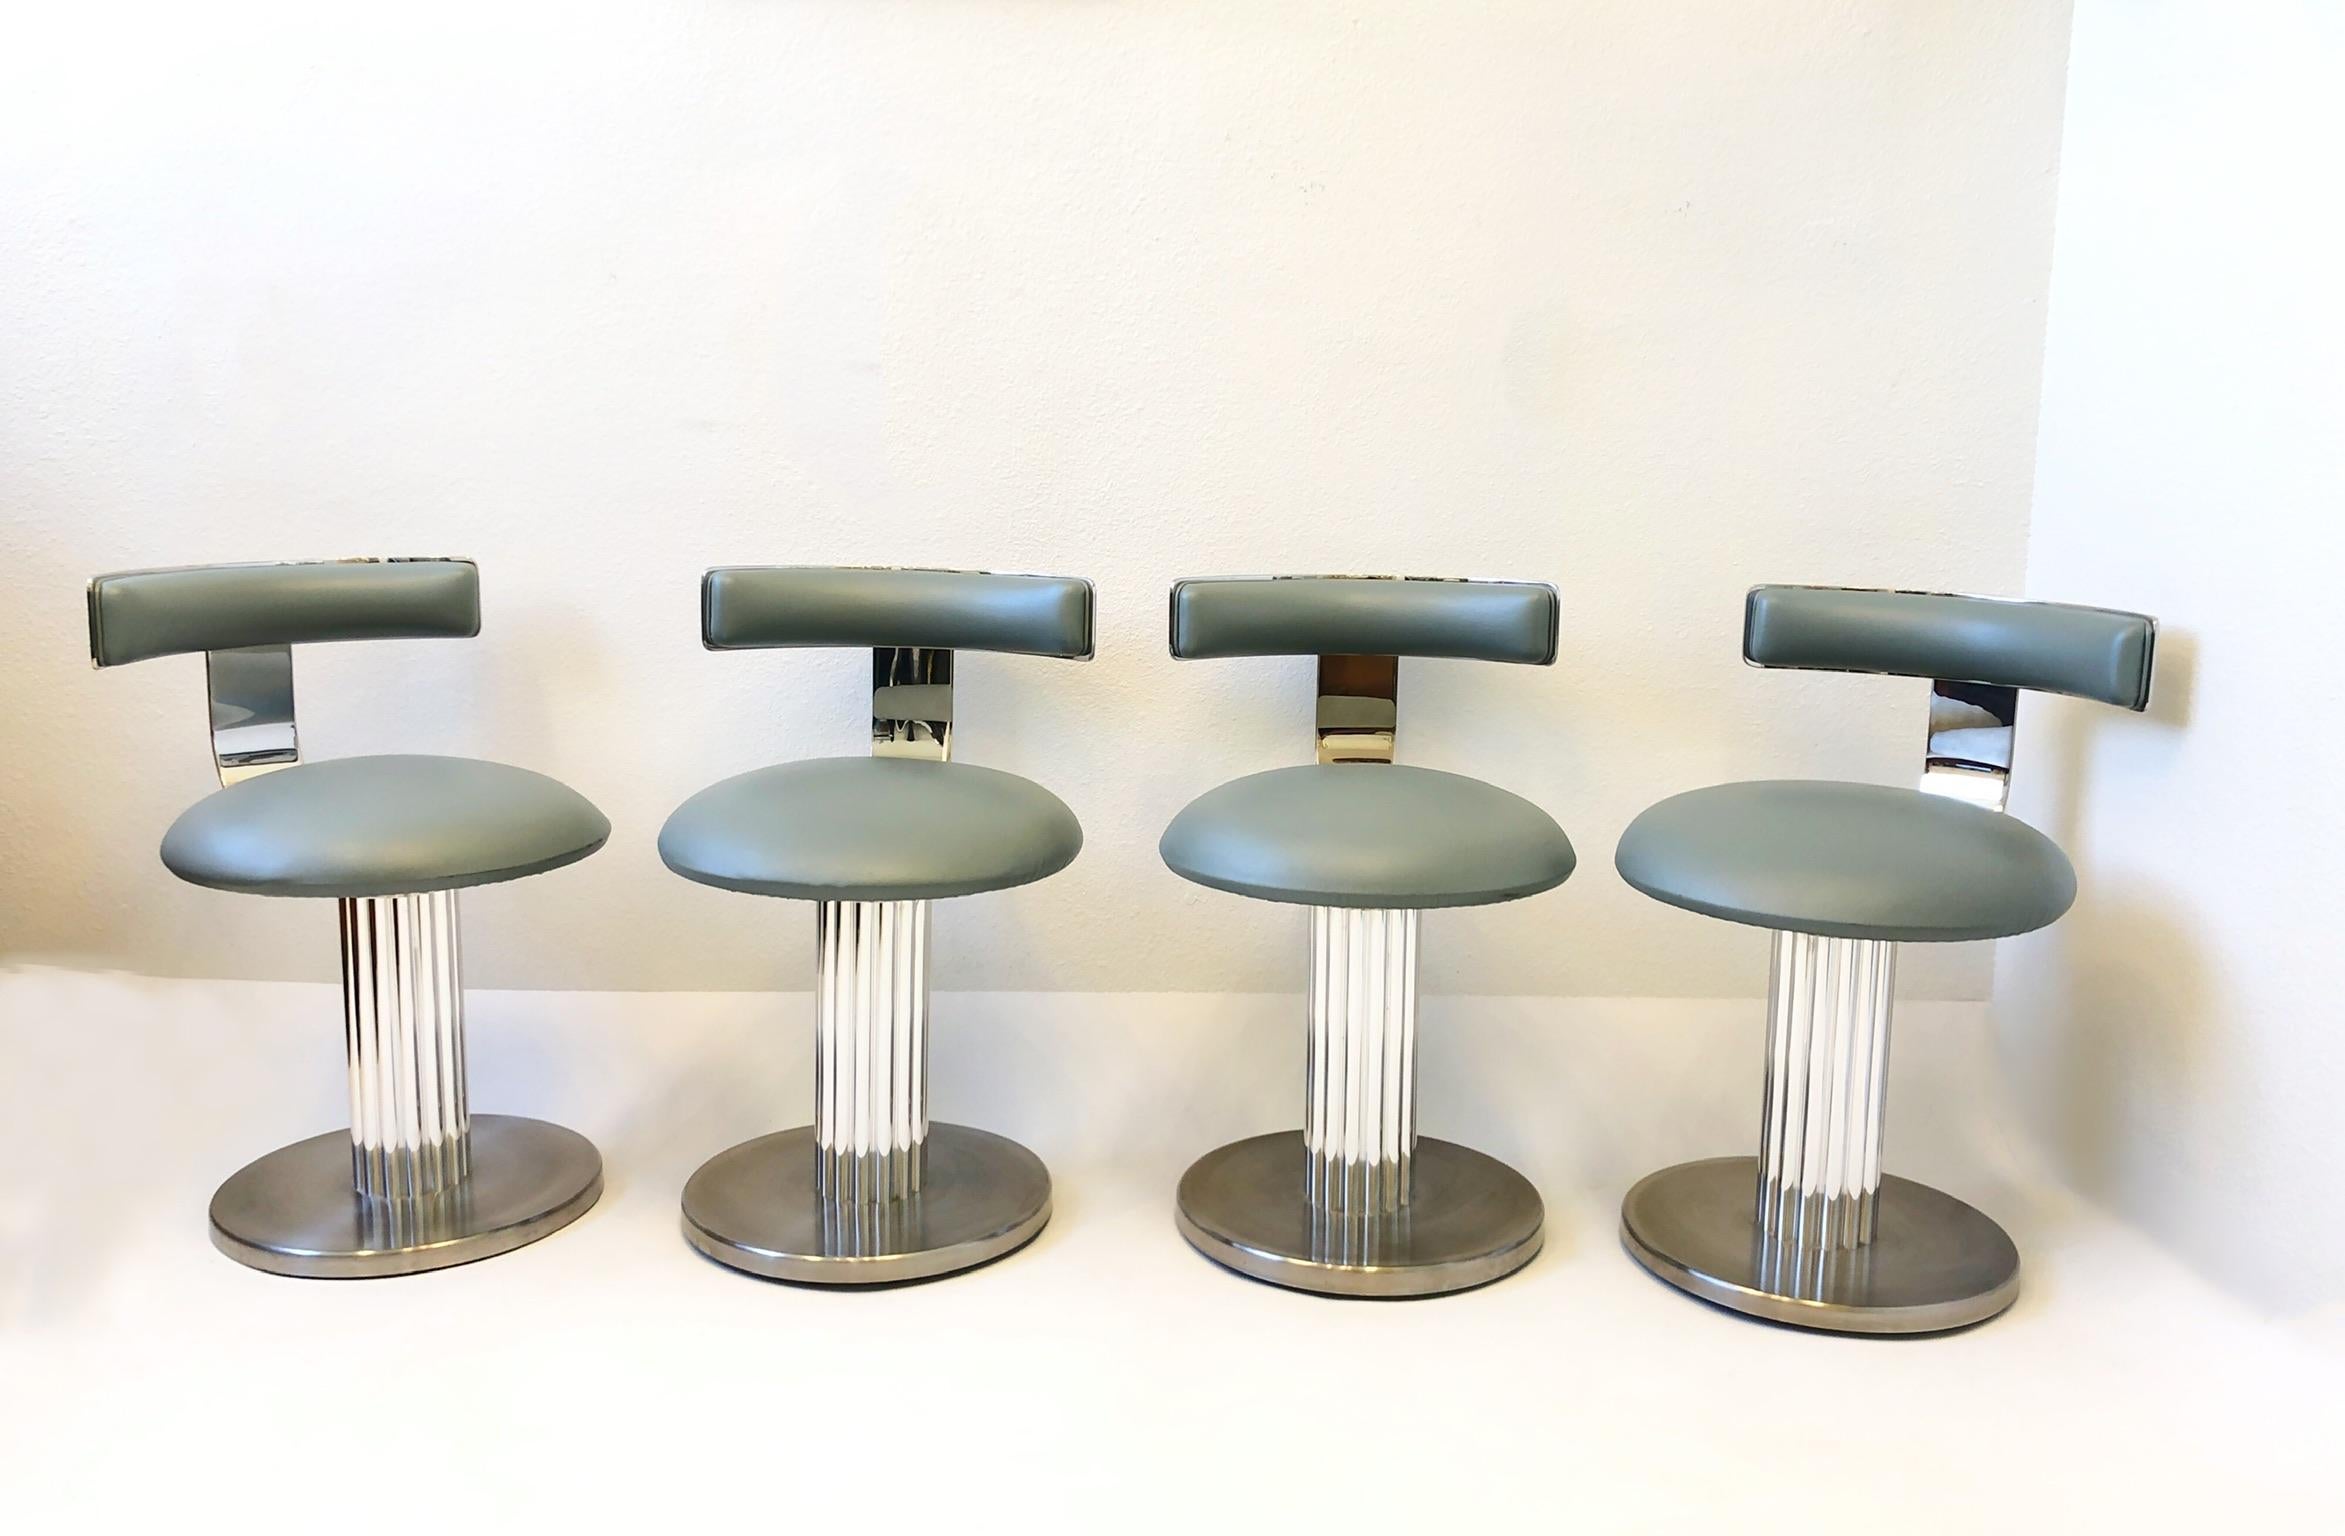 1980’s Swivel chairs or stools by Design for Leisure.
 Constructed of polish and brush stainless steel with original vinyl. 
Great for a sunken bar. Out of a Steve Chase designed estate. 
In great original condition, minor wear consistent with